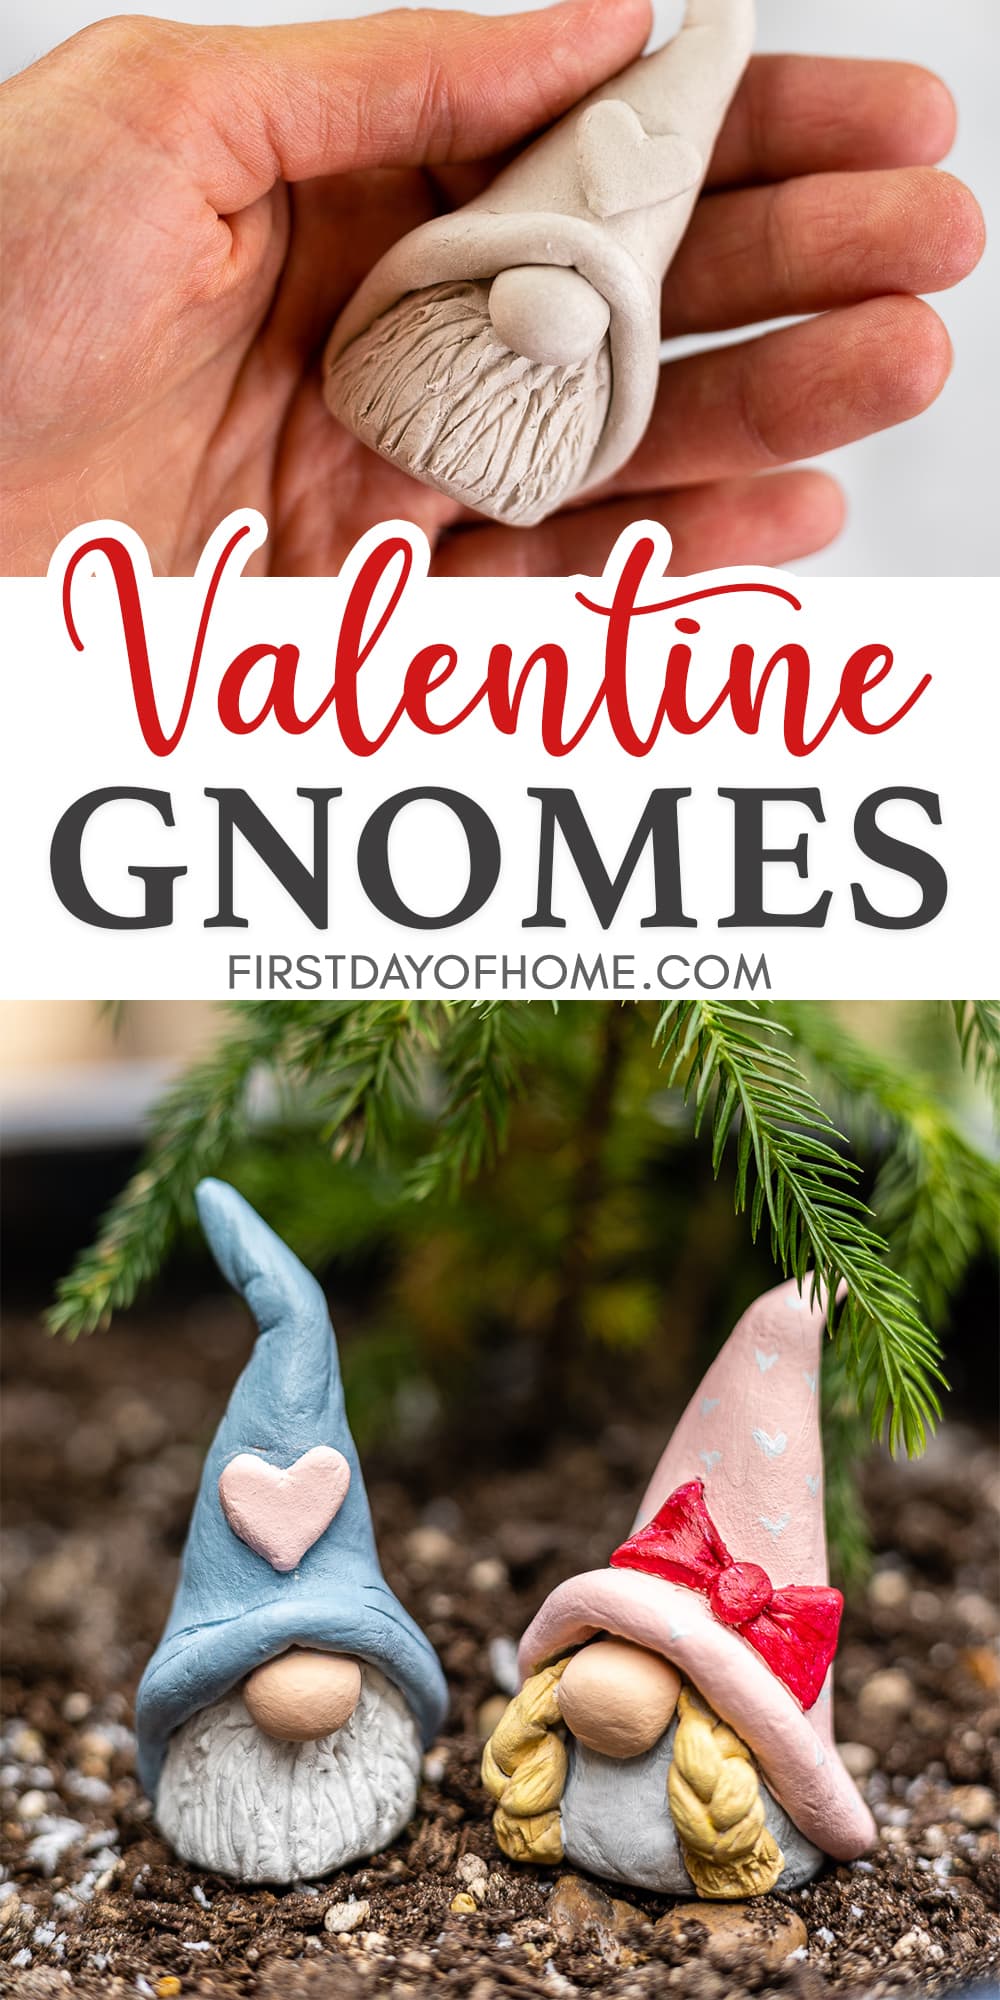 Valentine gnomes made with air dry clay with text overlay reading "Valentine gnomes"